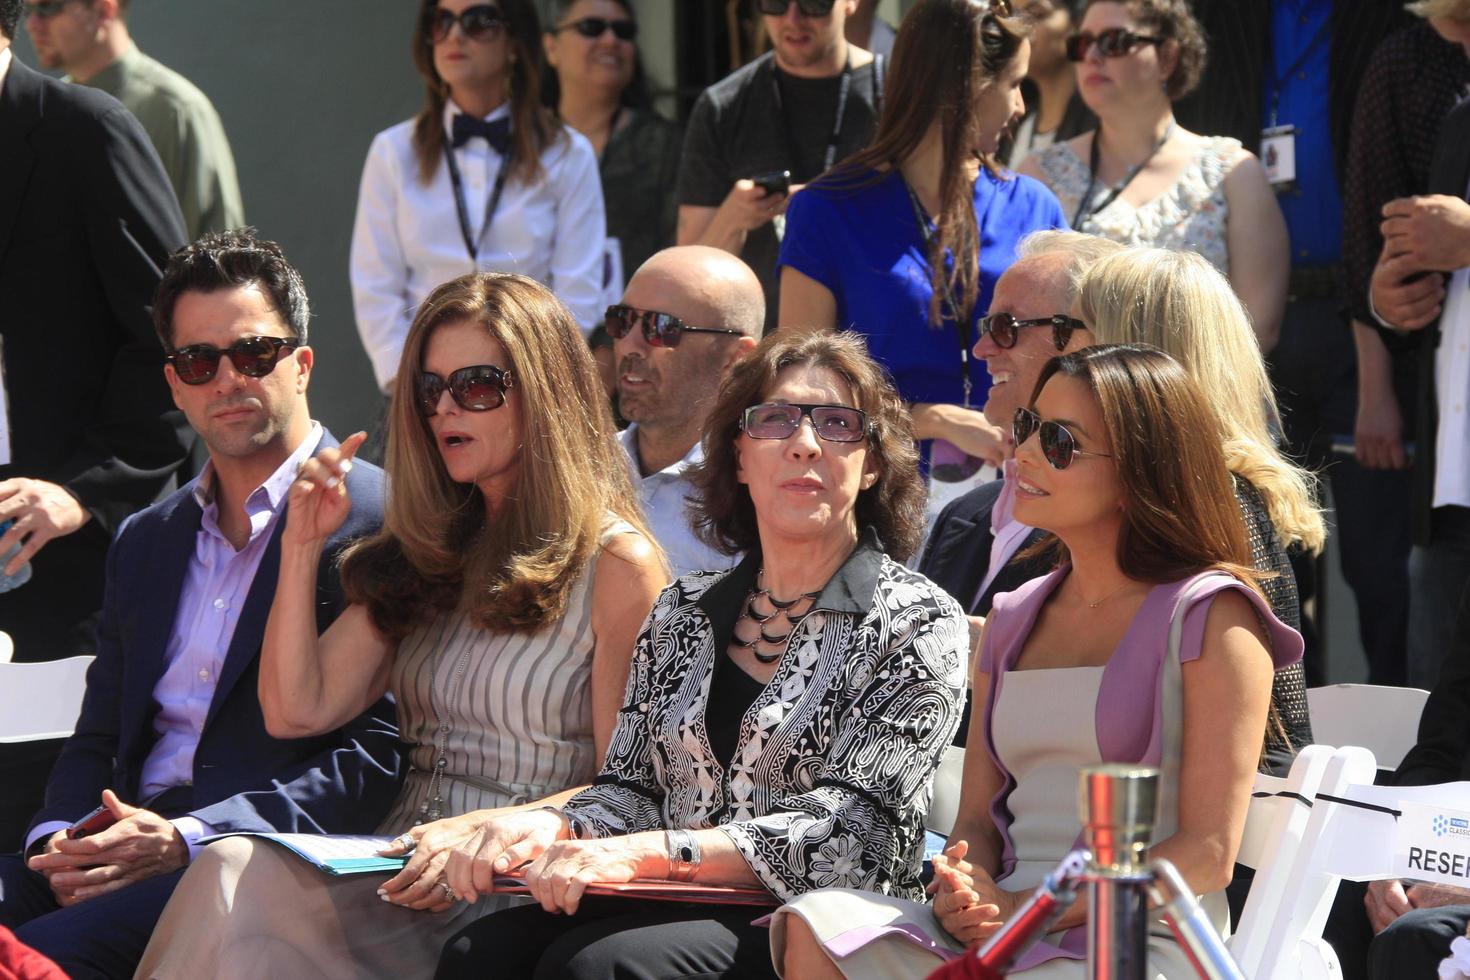 LOS ANGELES, APR 26 -  Troy Garity, Maria Shriver, Lily Tomlin, Eva Longoria at the Jane Fonda Hand and FootPrint Ceremony at the Chinese Theater on April 26, 2013 in Los Angeles, CA photo